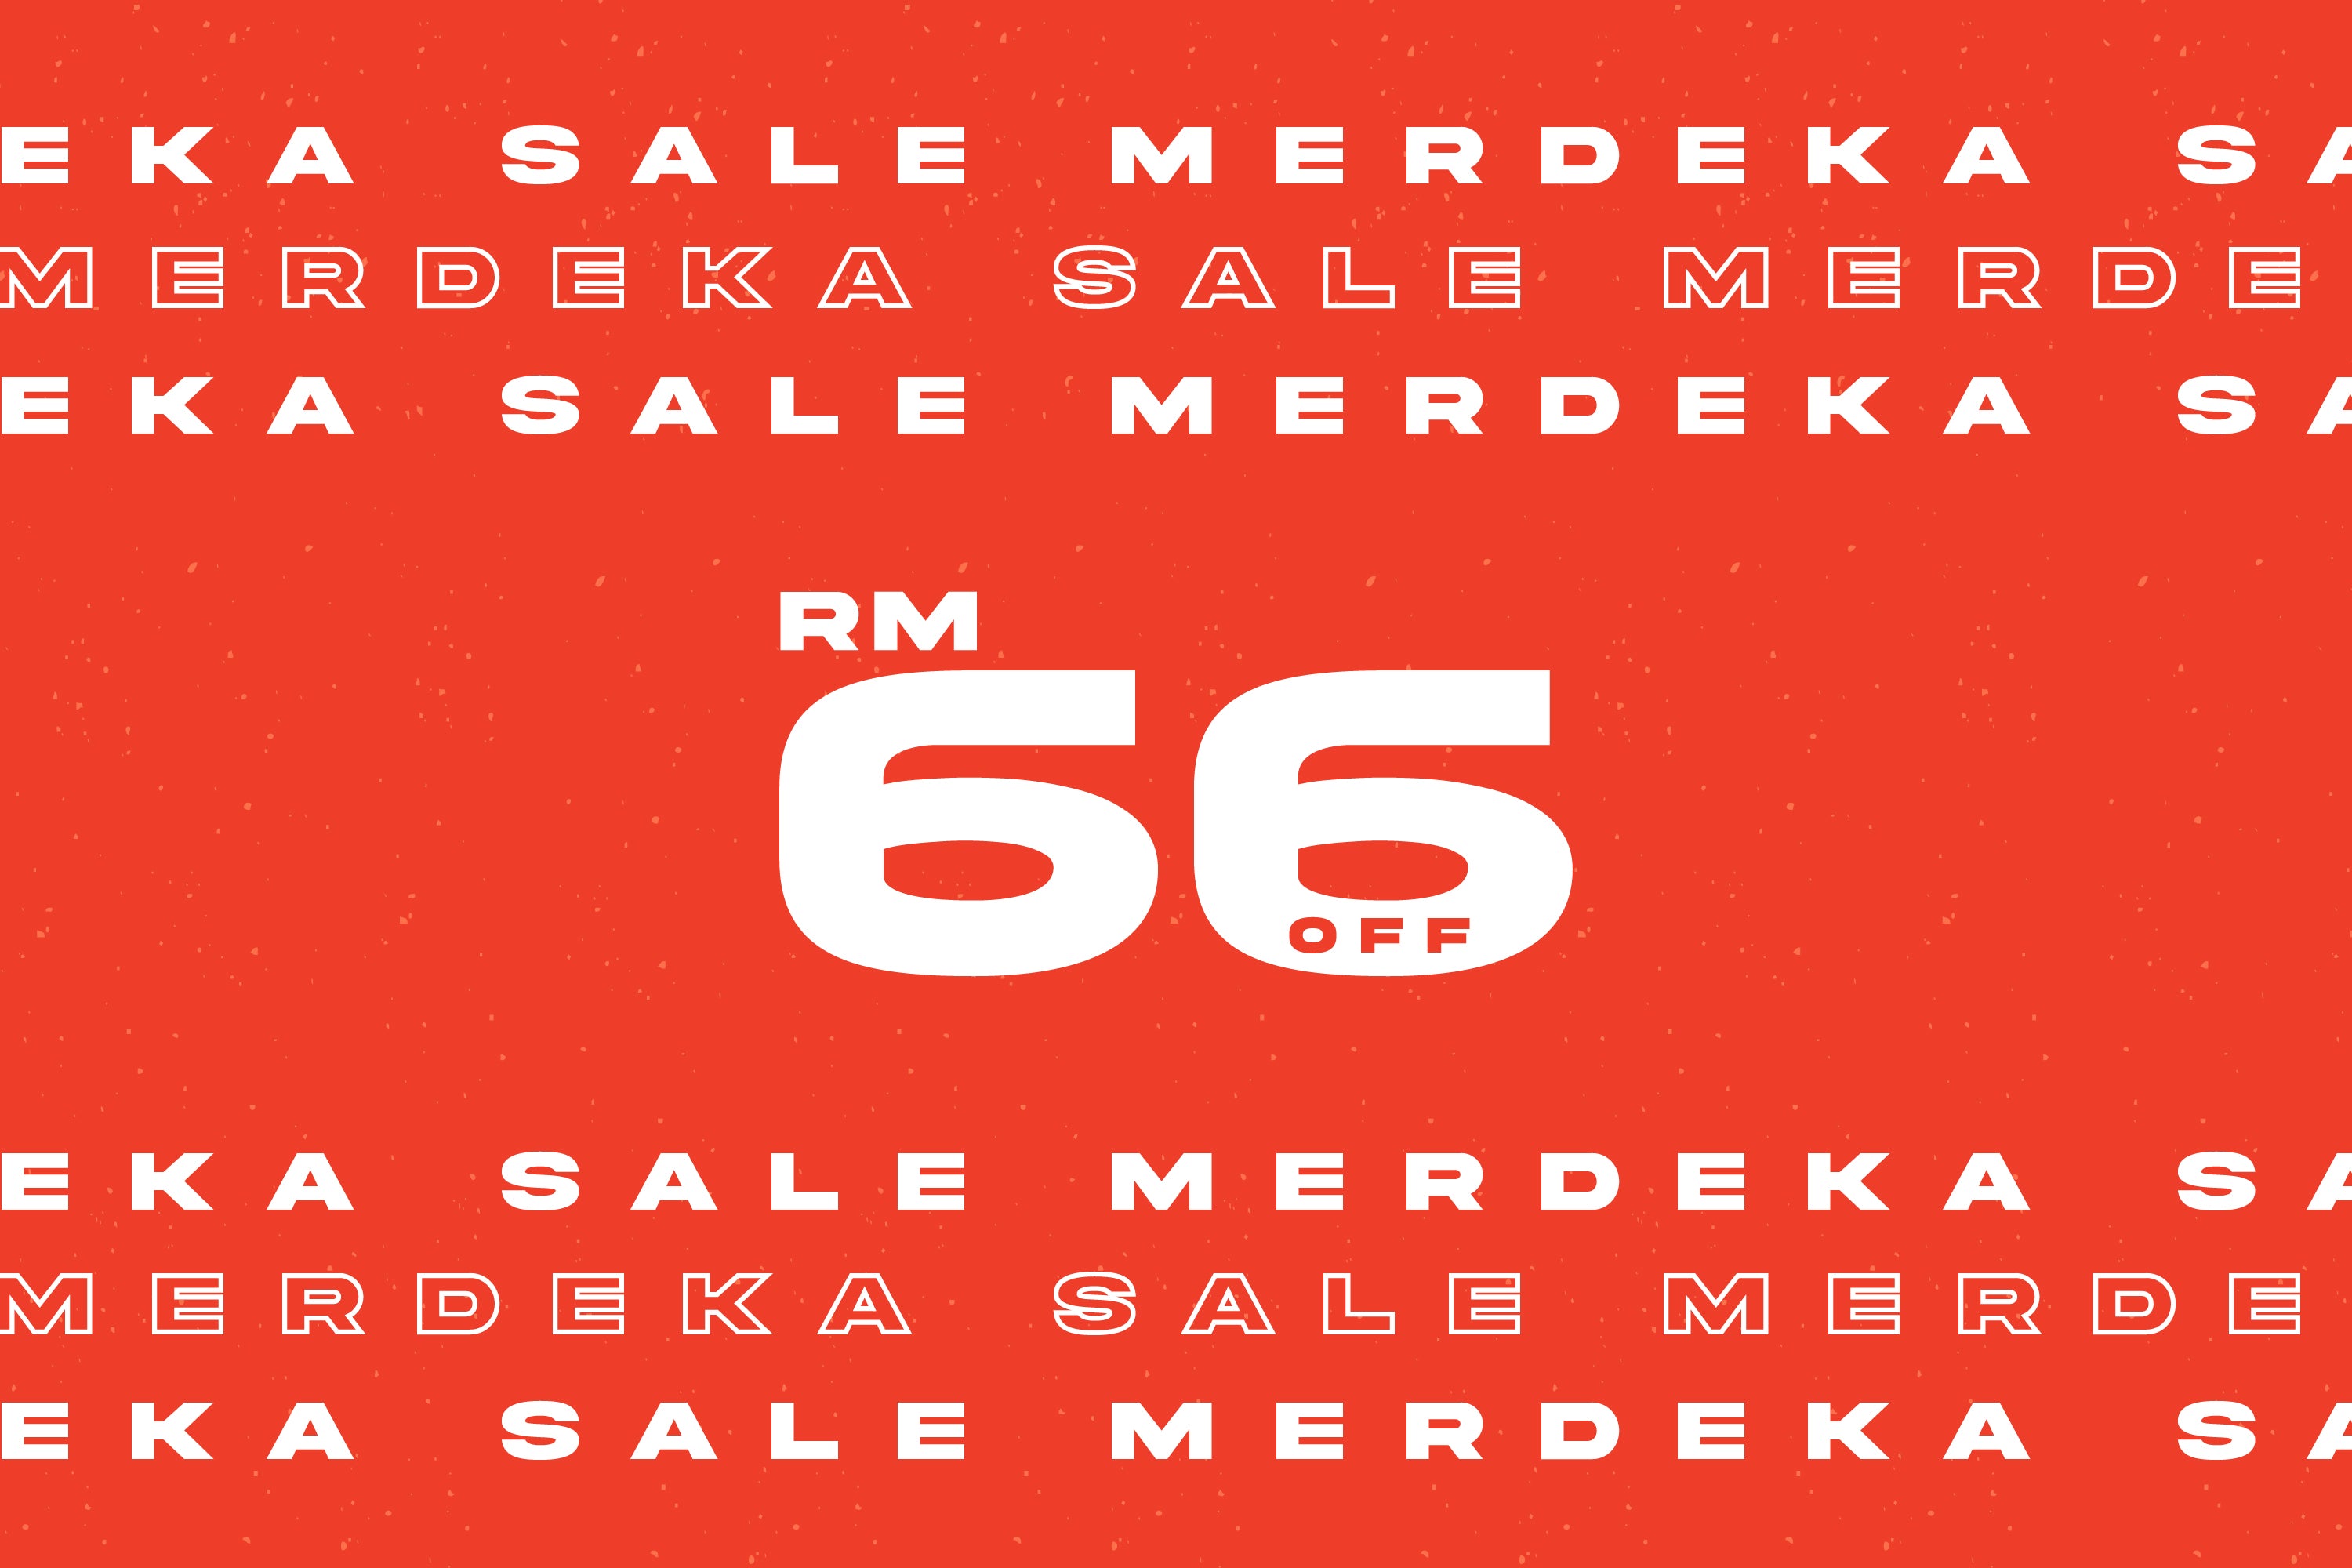 23 - Celebrate 66 Glorious Years of Independence with the Merdeka Sale!